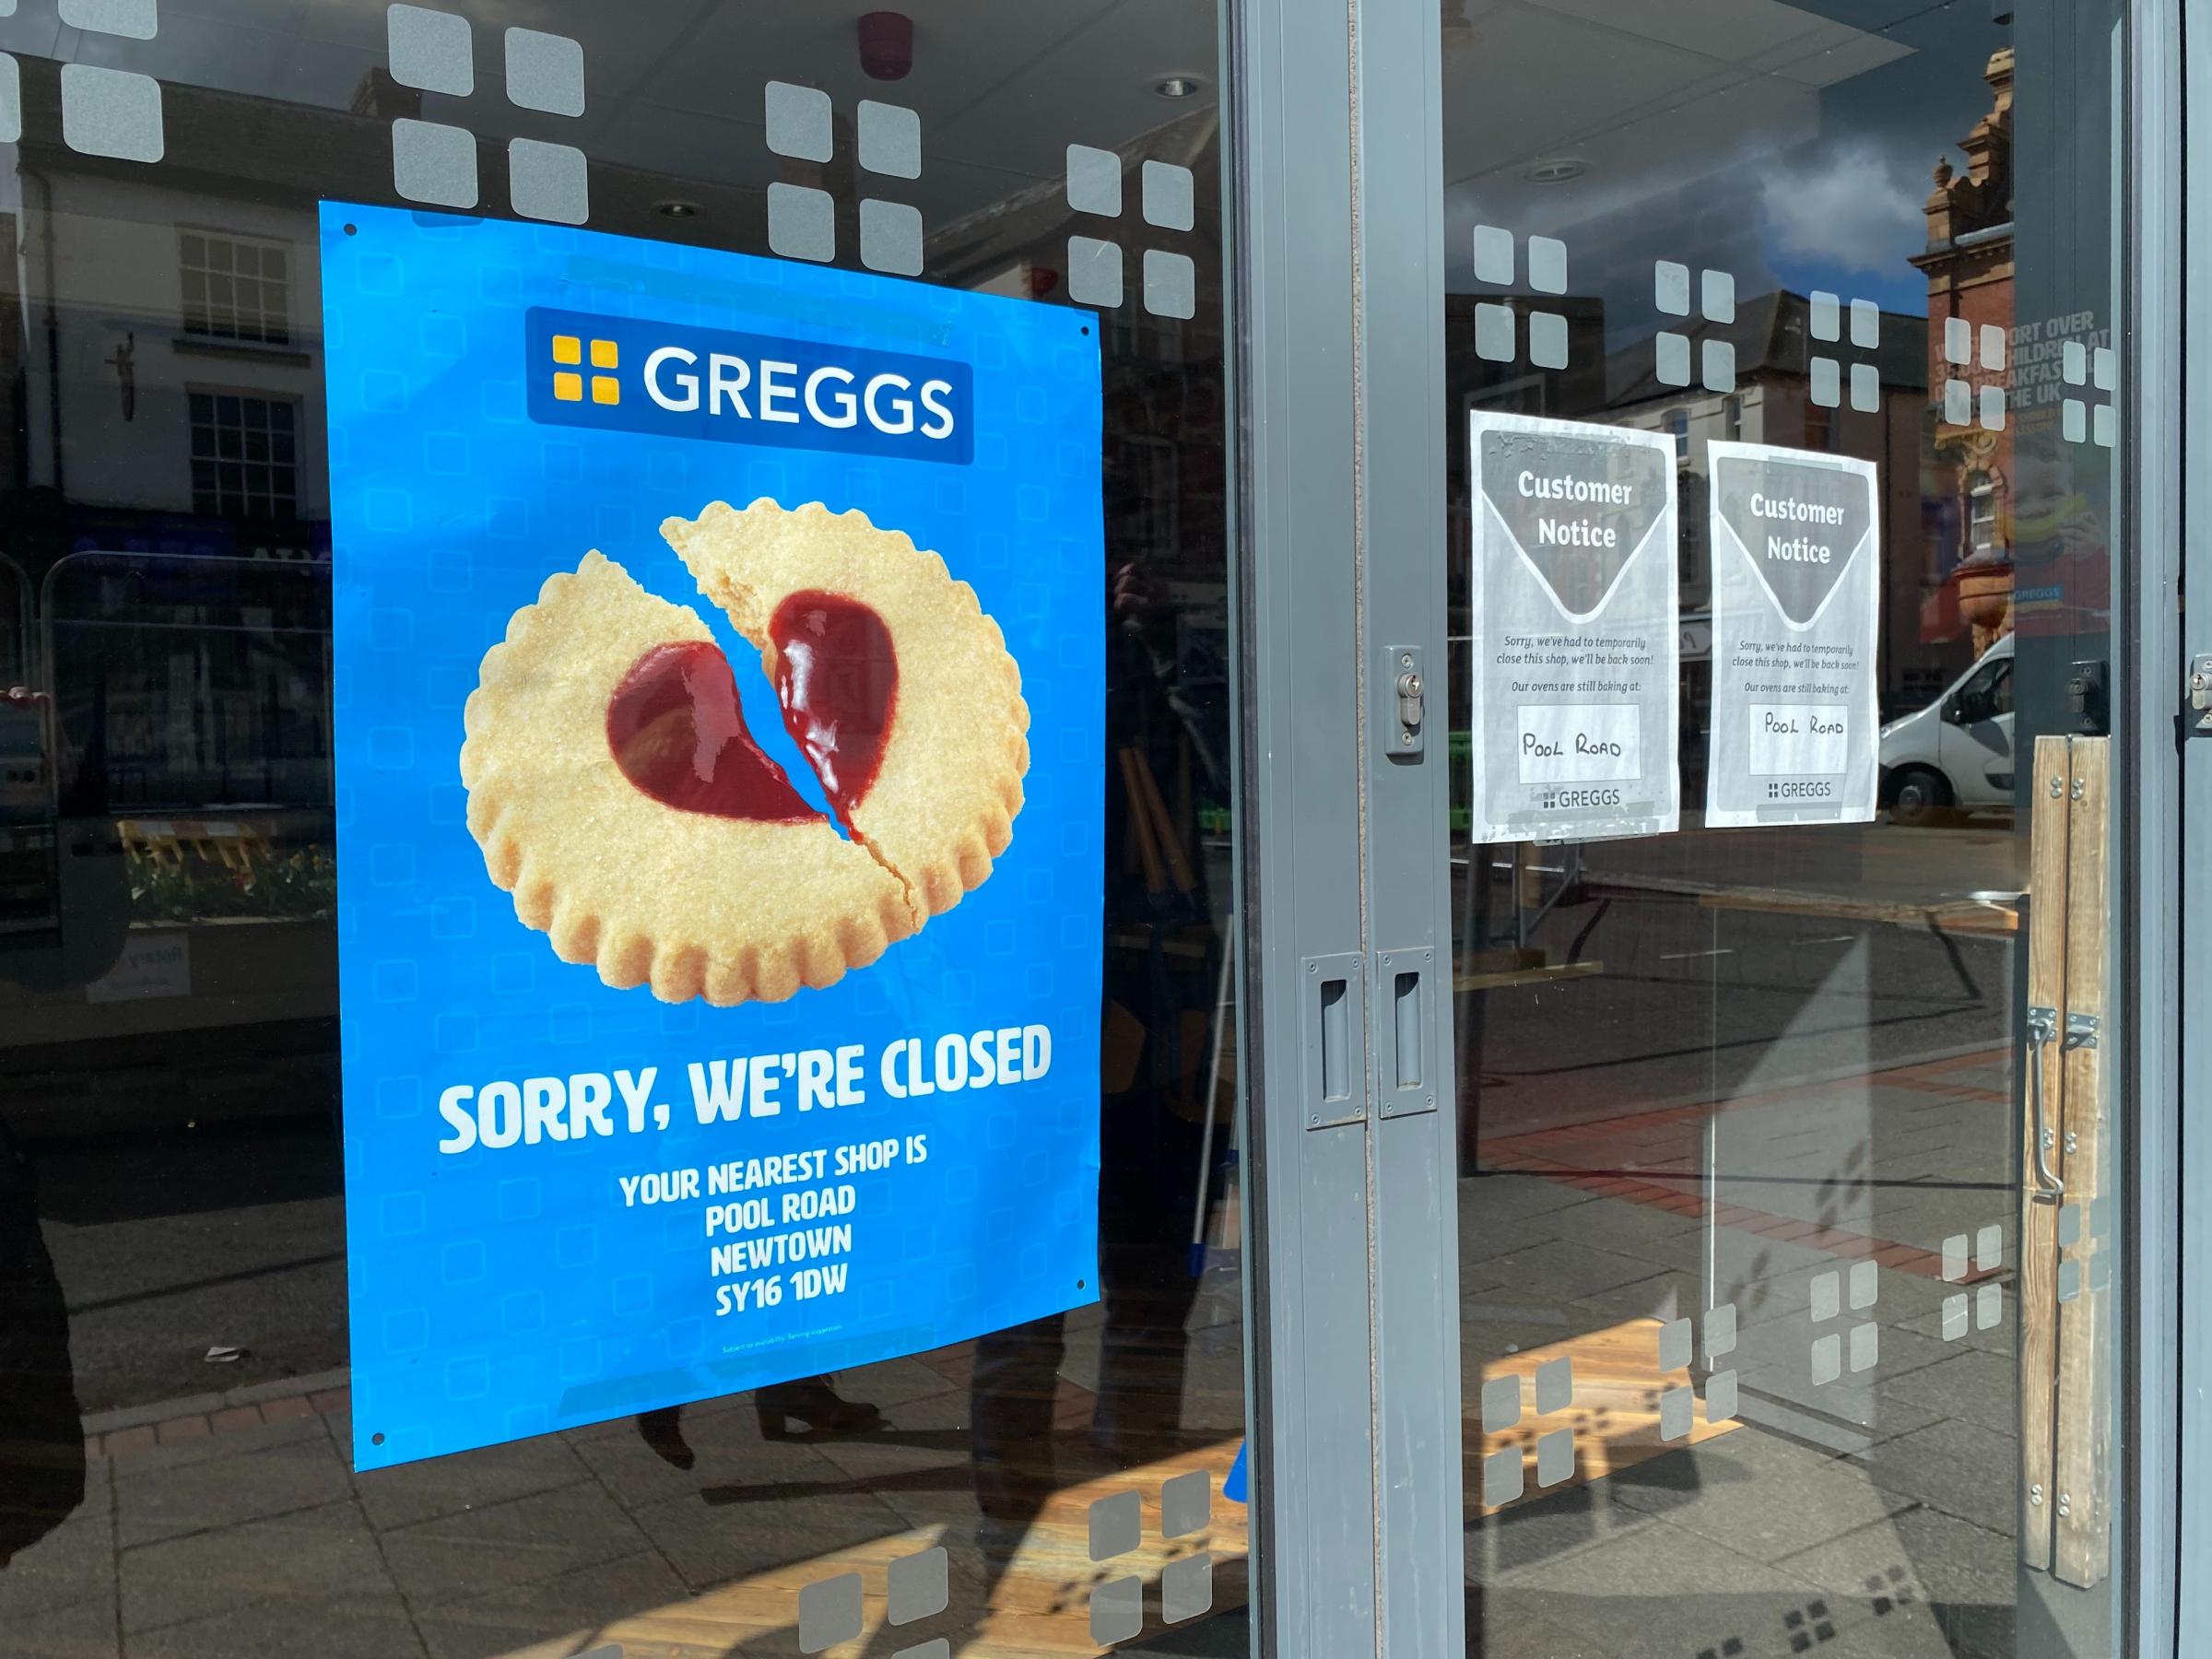 Customers have been told that the Greggs shop in High Street, Newtown is temporarily closed.